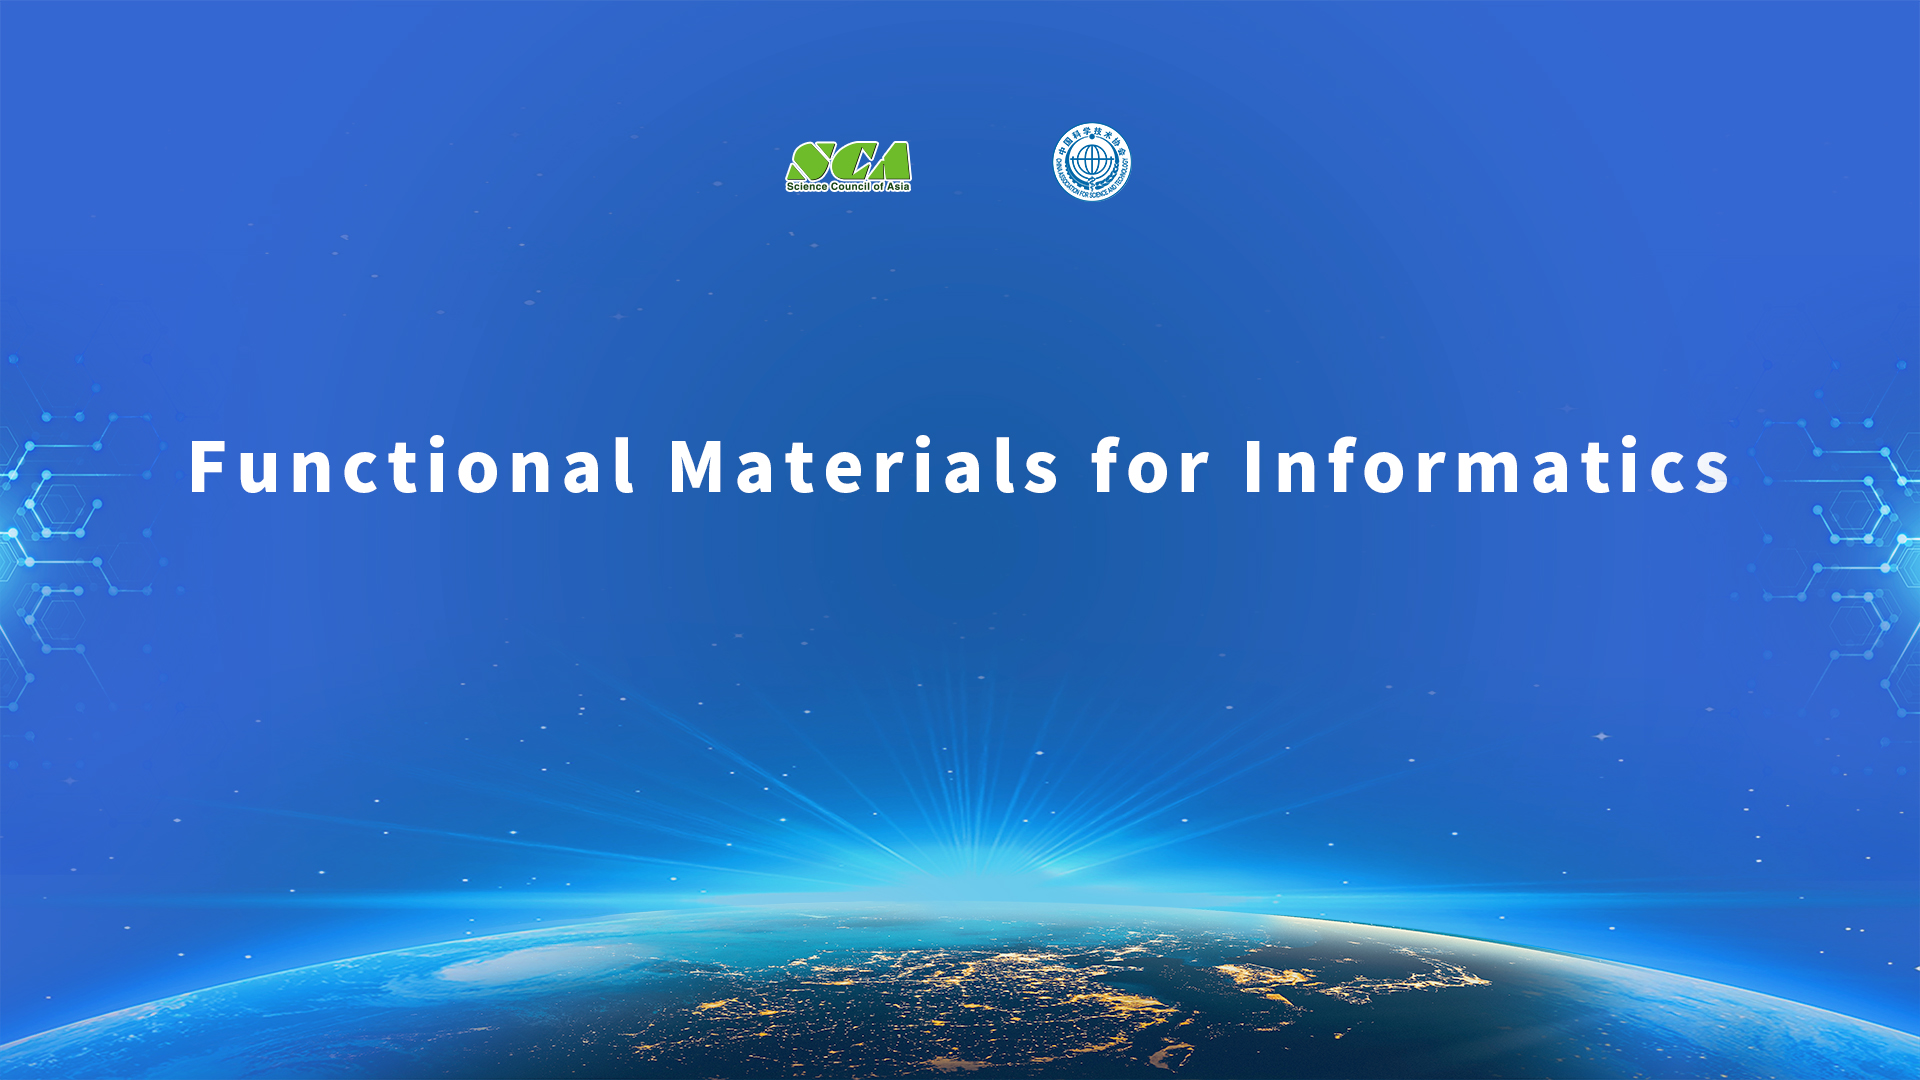 Session 3: Functional Materials for Informatics